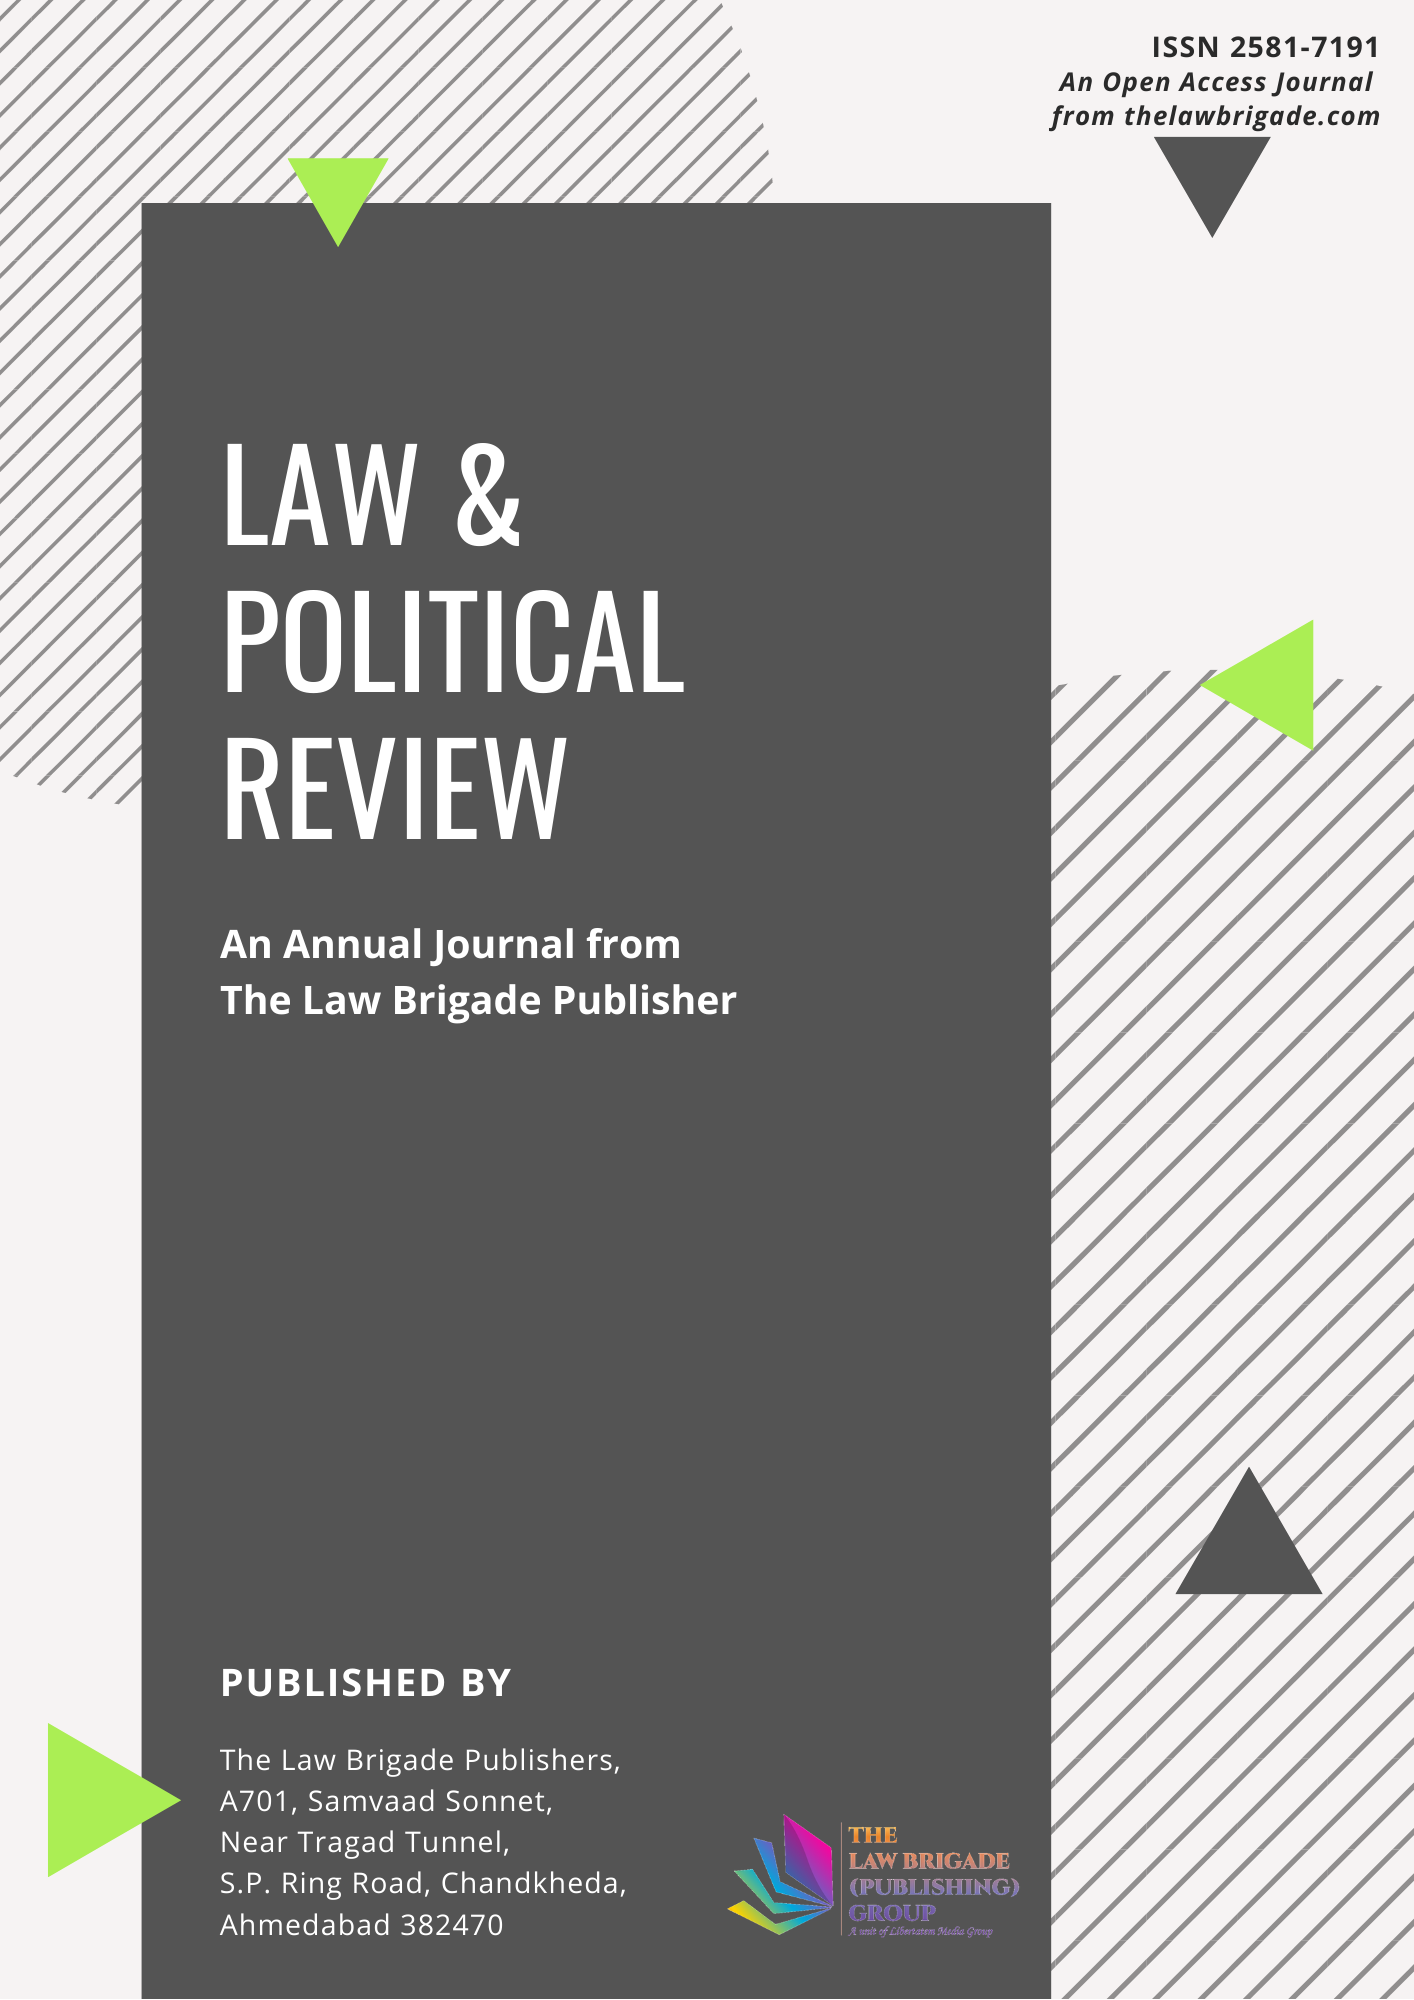 Law & Political Review